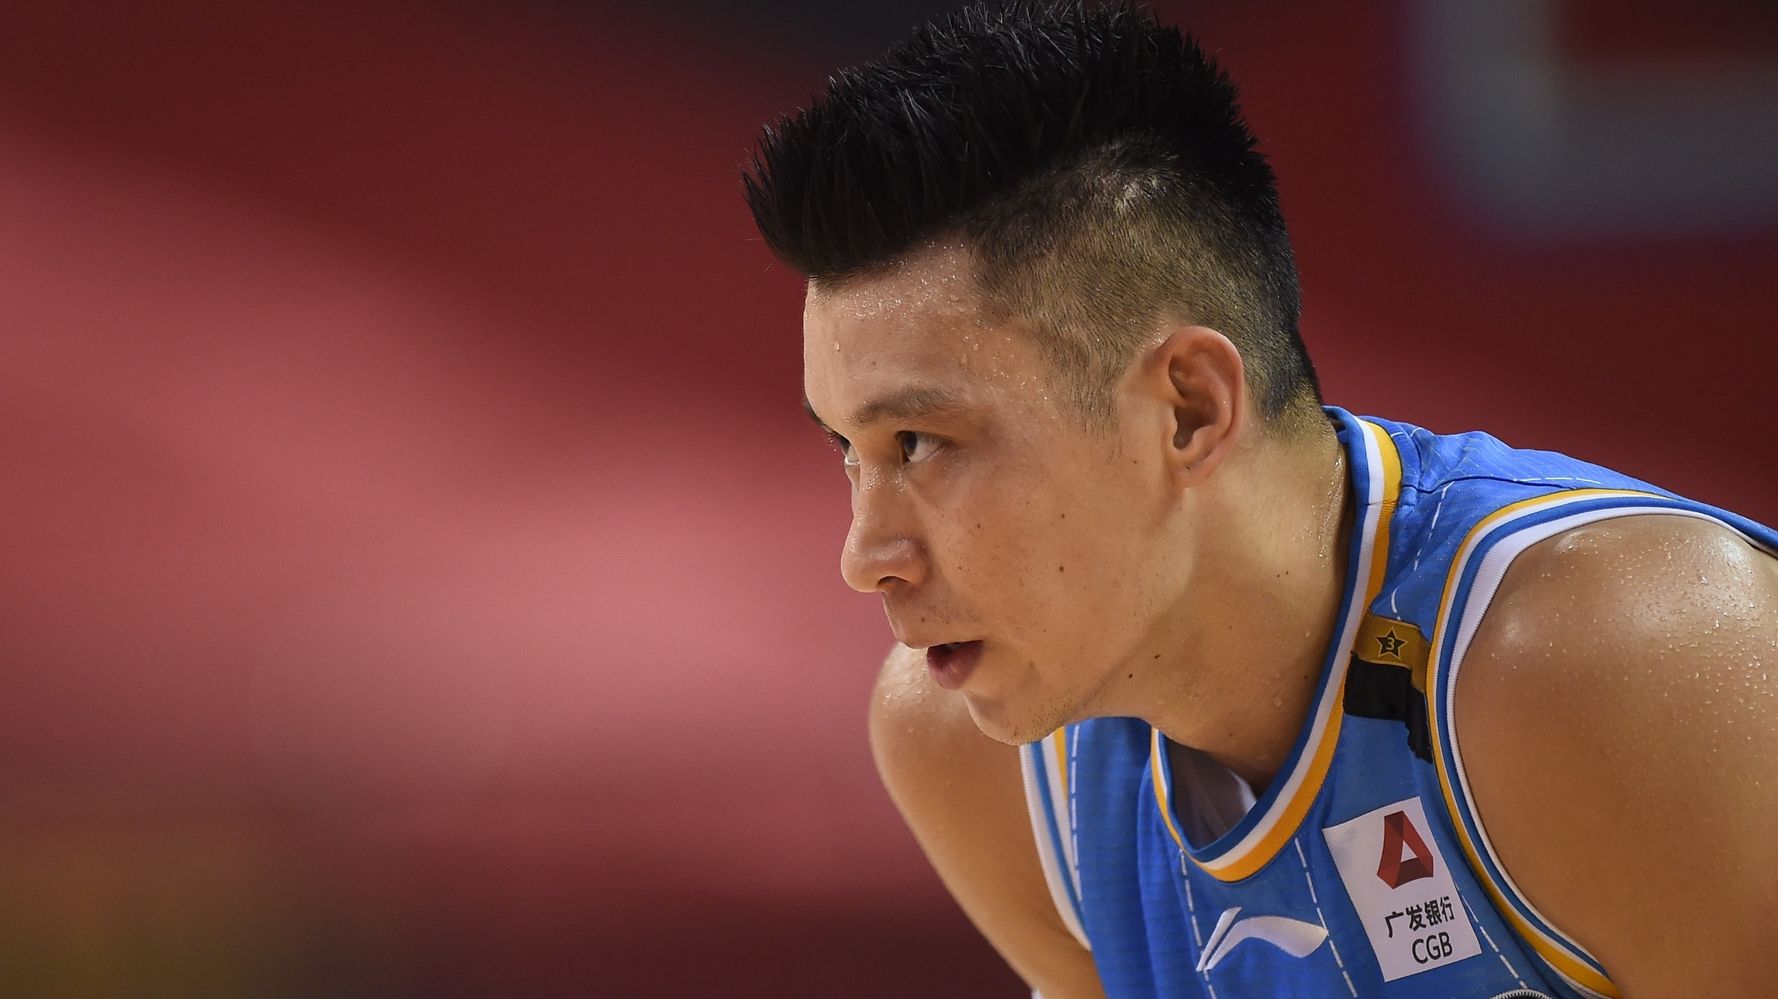 Basketball officials investigated the allegation that Jeremy Lin was called a “coronavirus” on the court